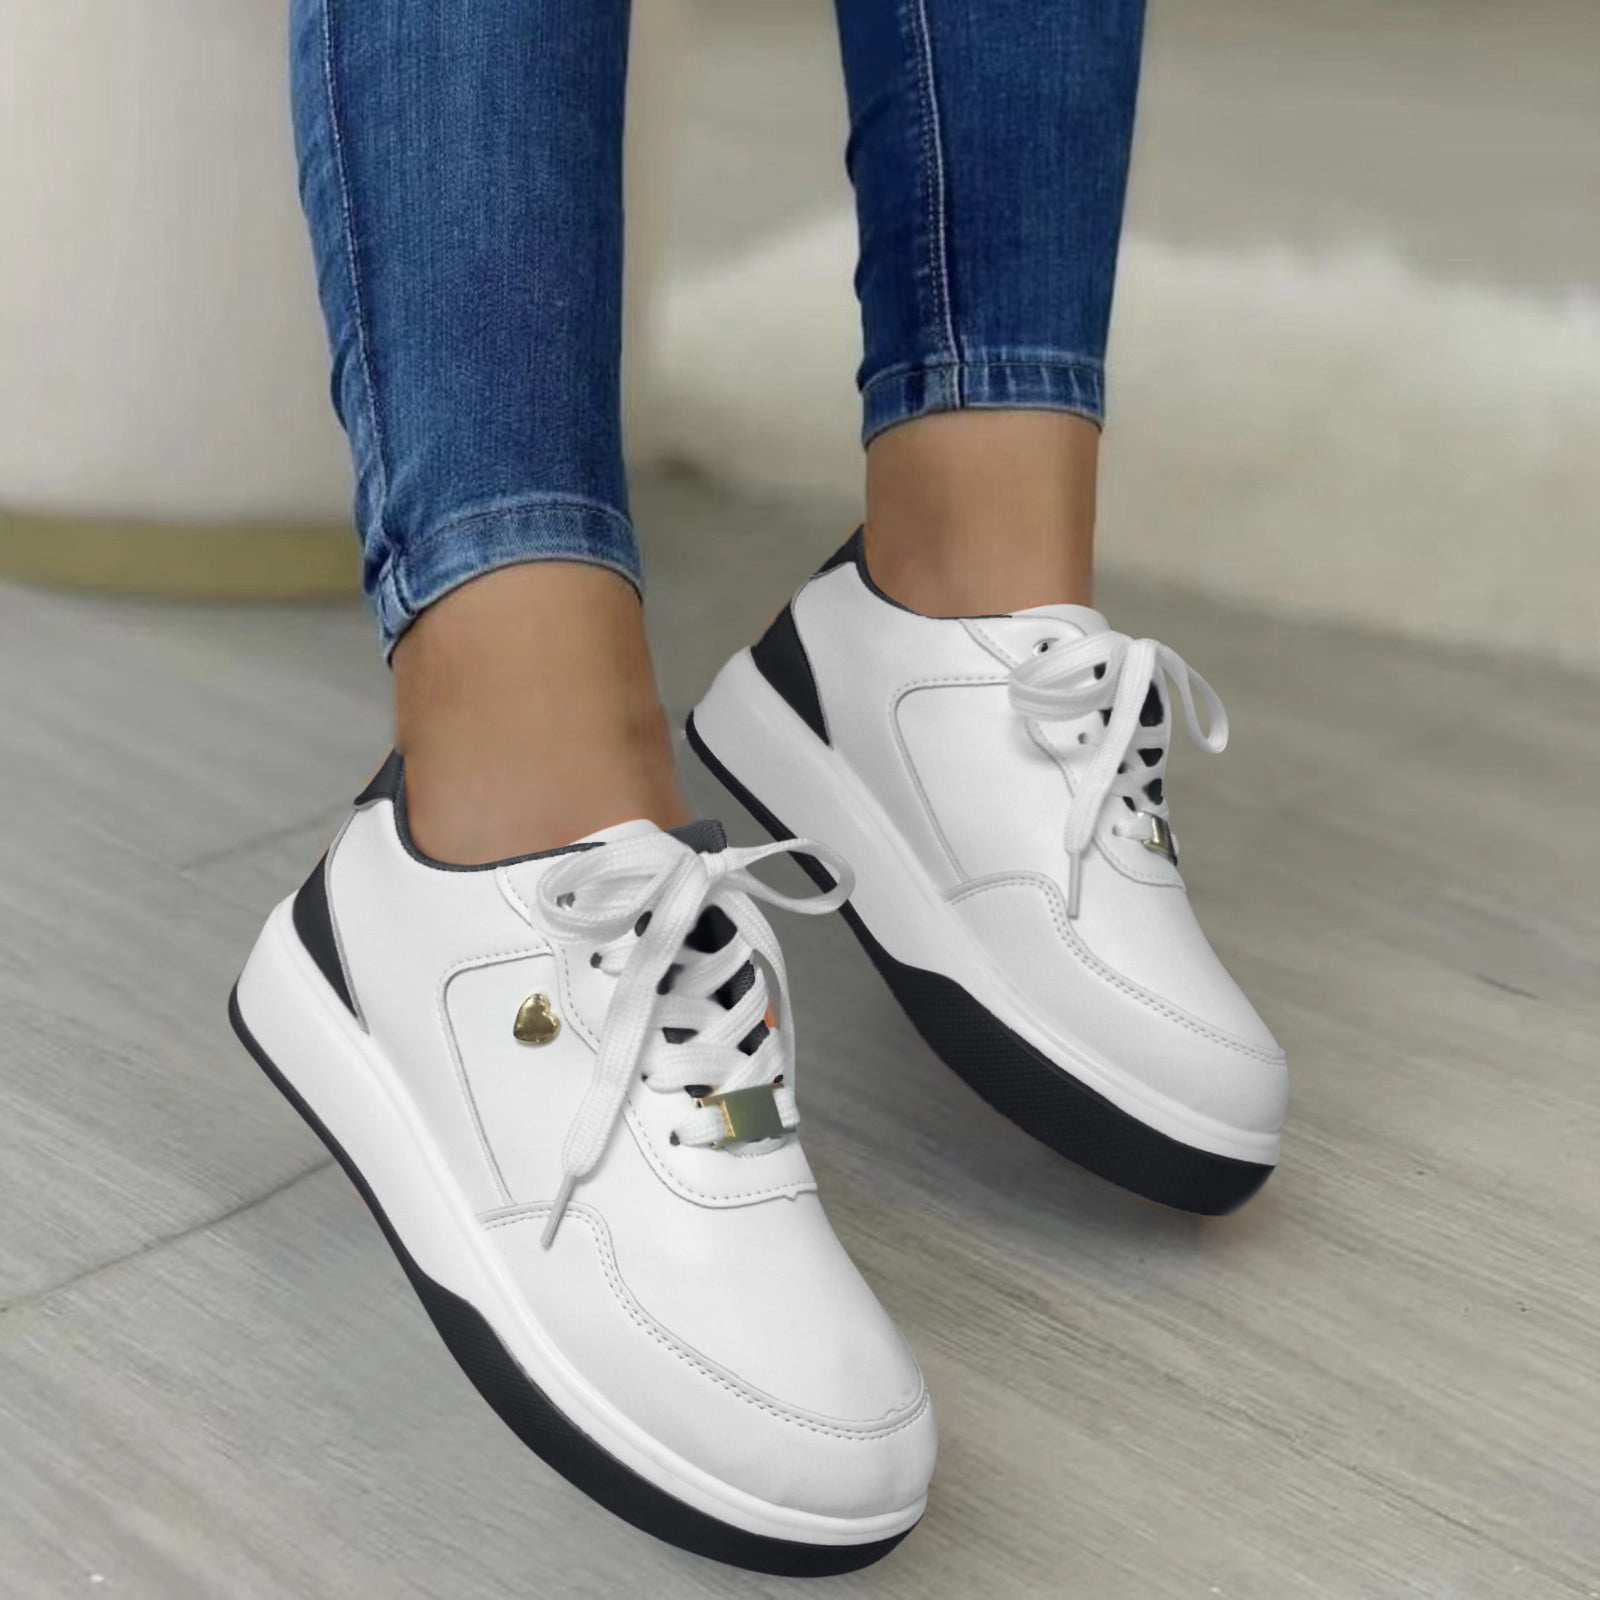 Leather Insole Women sneakers Fashion White Platform Lightweight Casual Shoes  Comfortable Good Quality Authorized Italy Brand